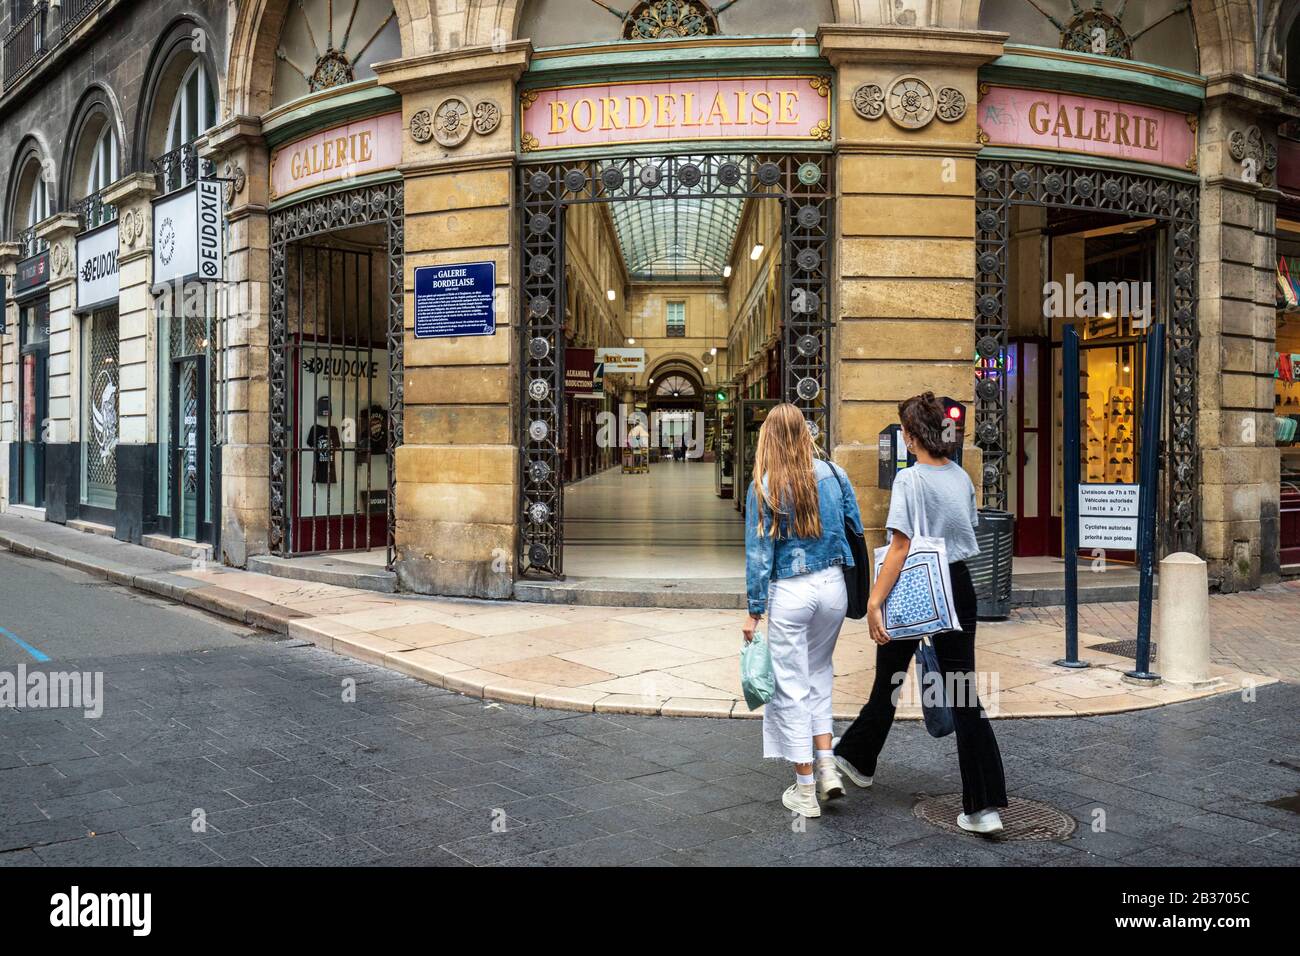 France, Gironde, Bordeaux, area listed as World Heritage by UNESCO, rue Piliers de Tutelle, entrance to the Galerie Bordelaise, shopping gallery built in 1833 Stock Photo